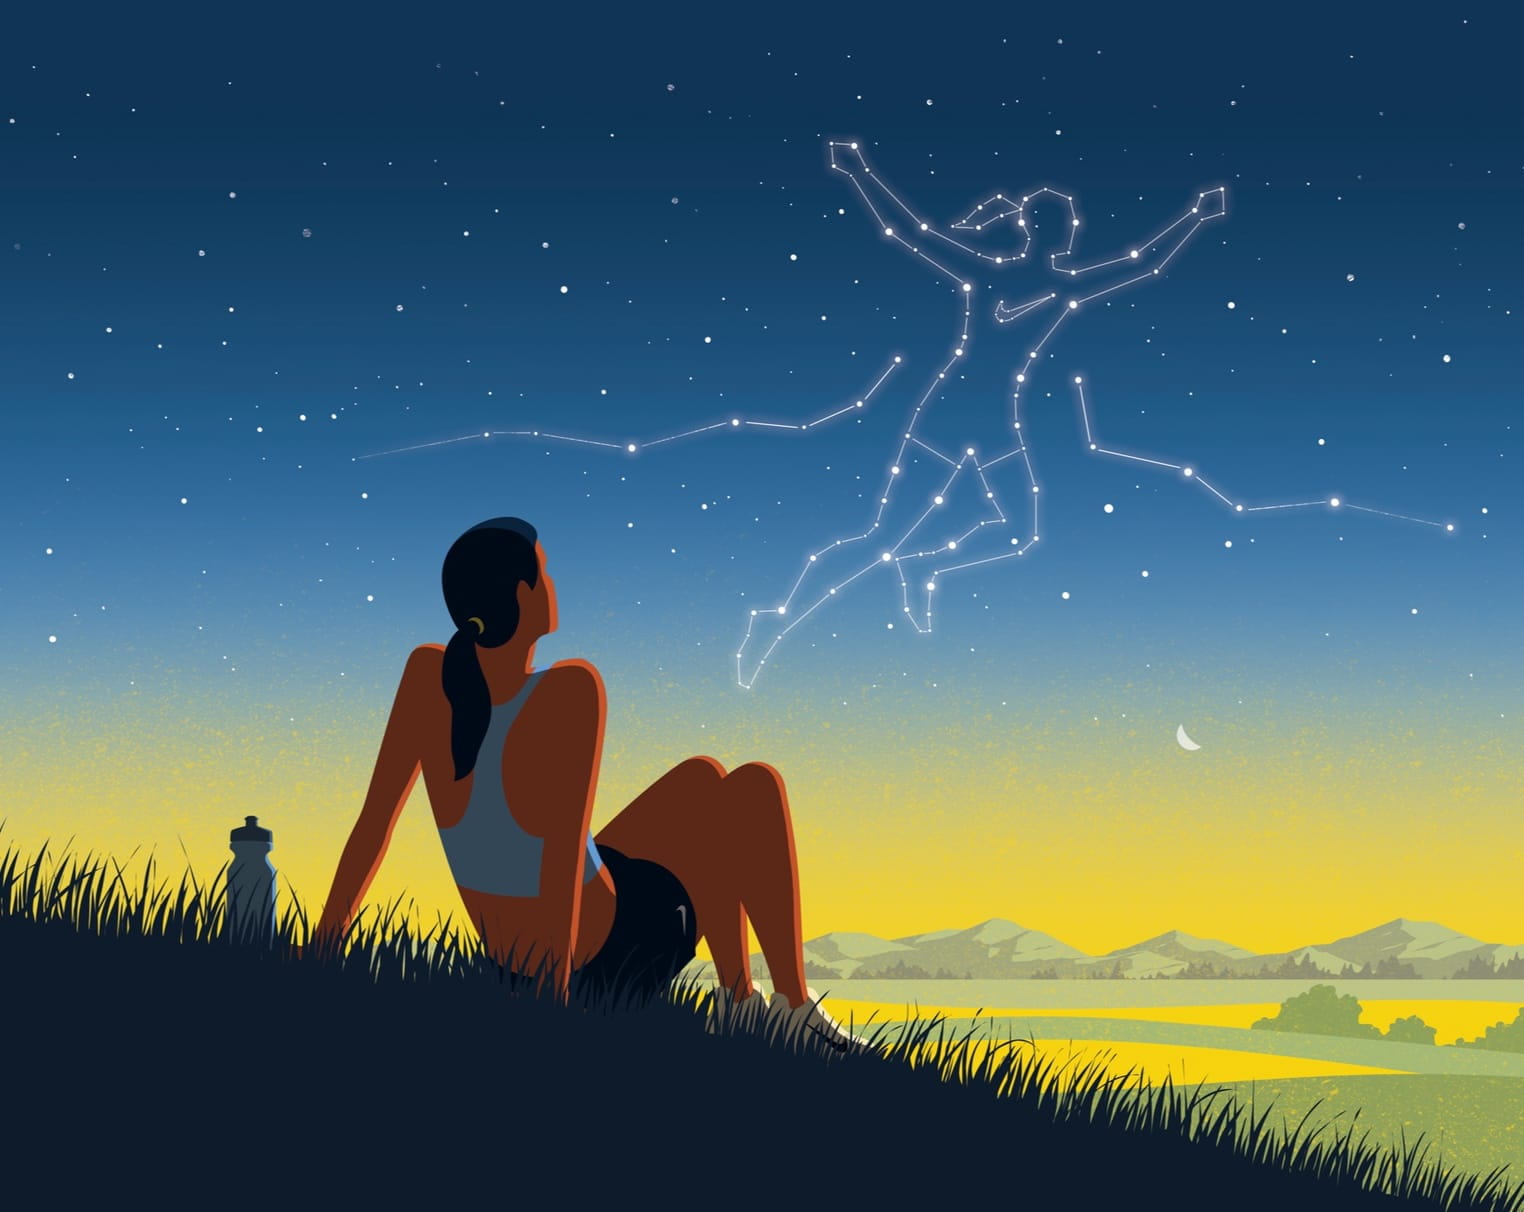 illustration of an athlete imagining success in the stars